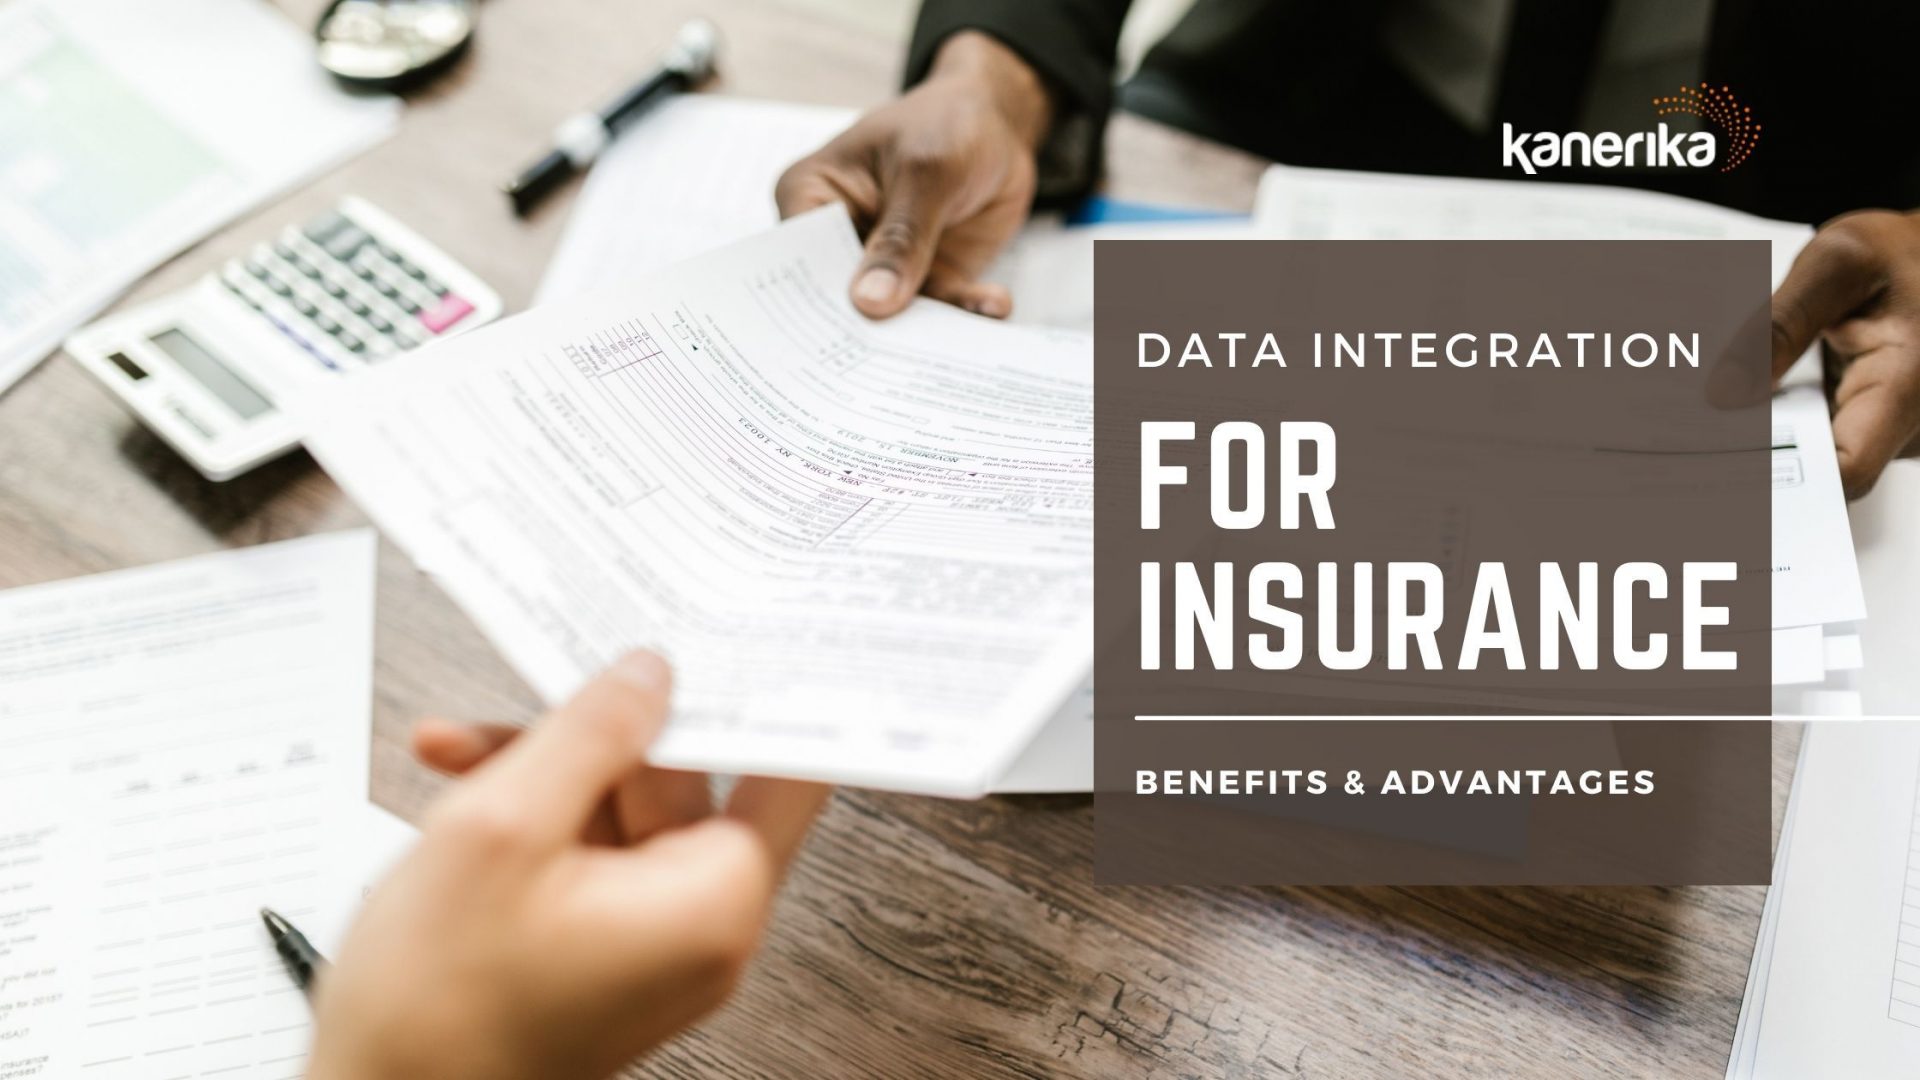 Data integration assists insurance companies in integrating data from a variety of sources that helps improve their customer profiling.